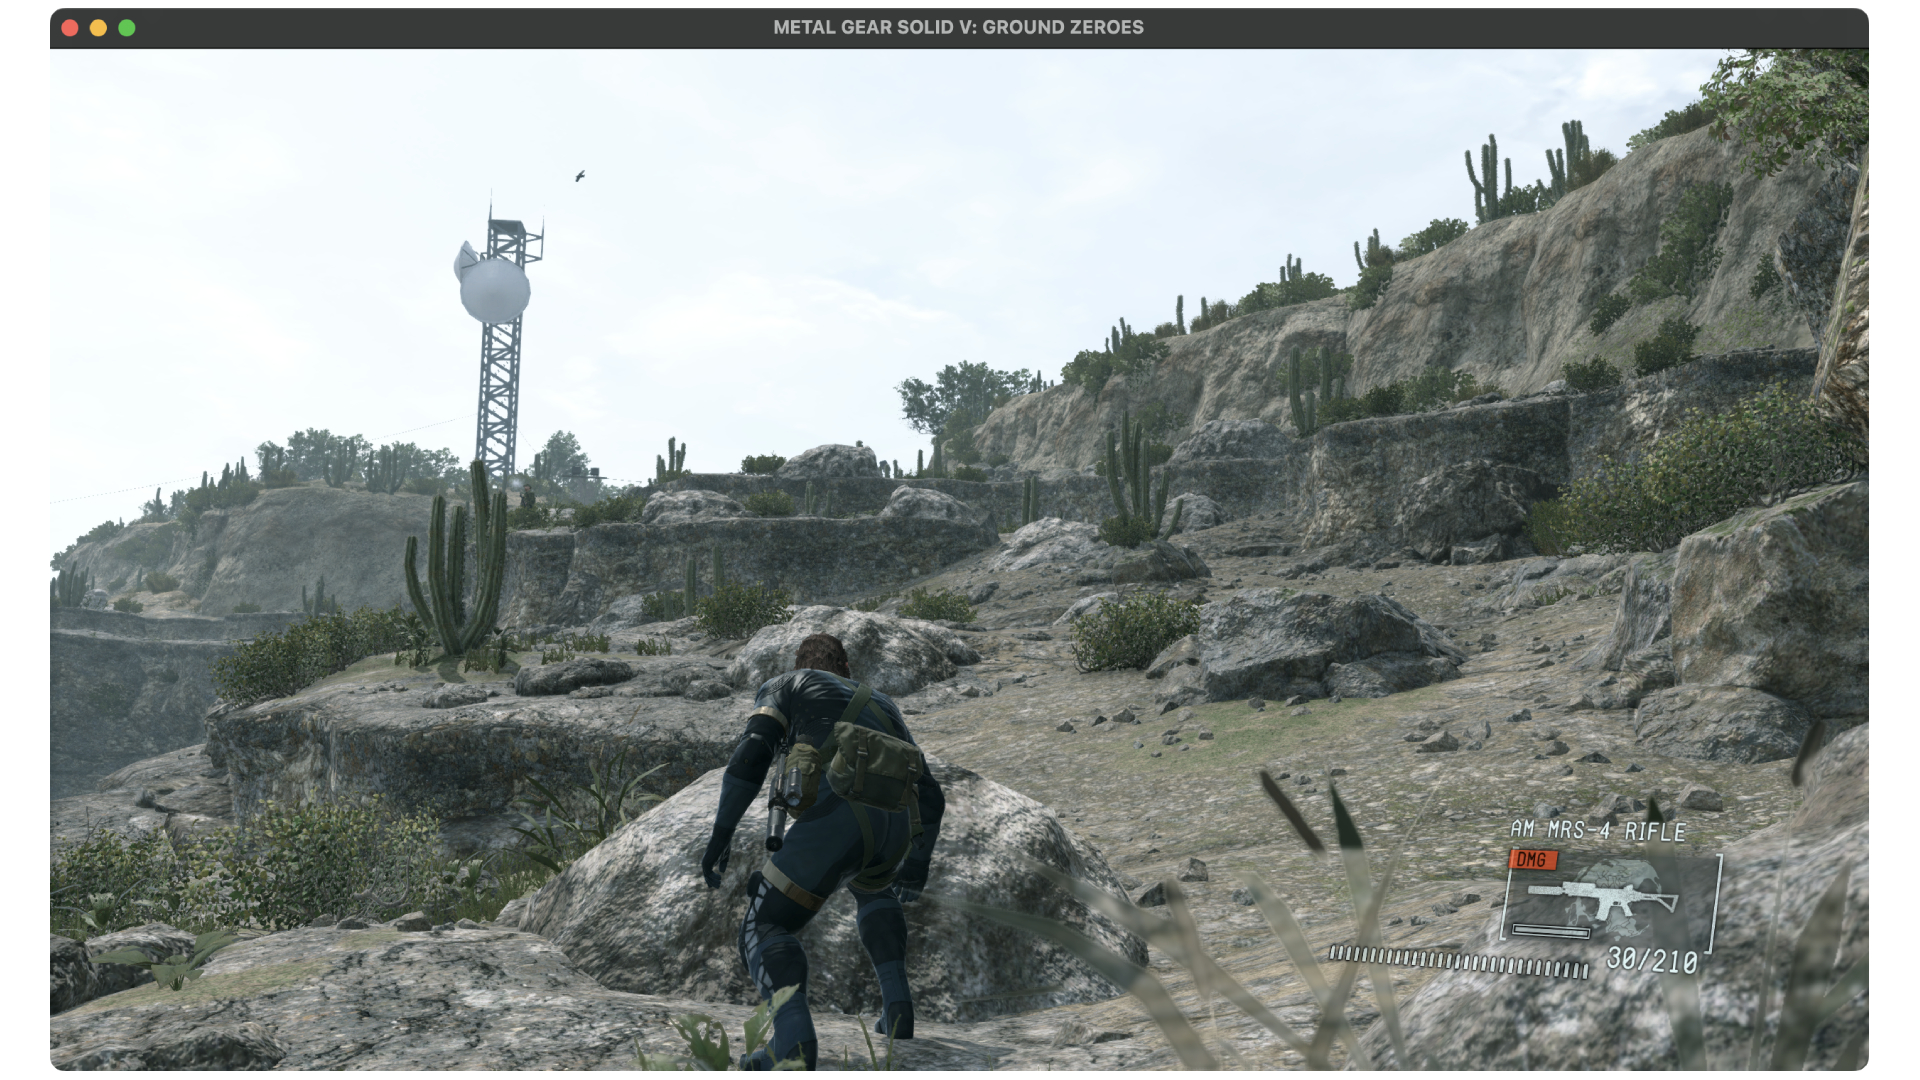 Metal Gear Solid V: Ground Zeroes in Whisky